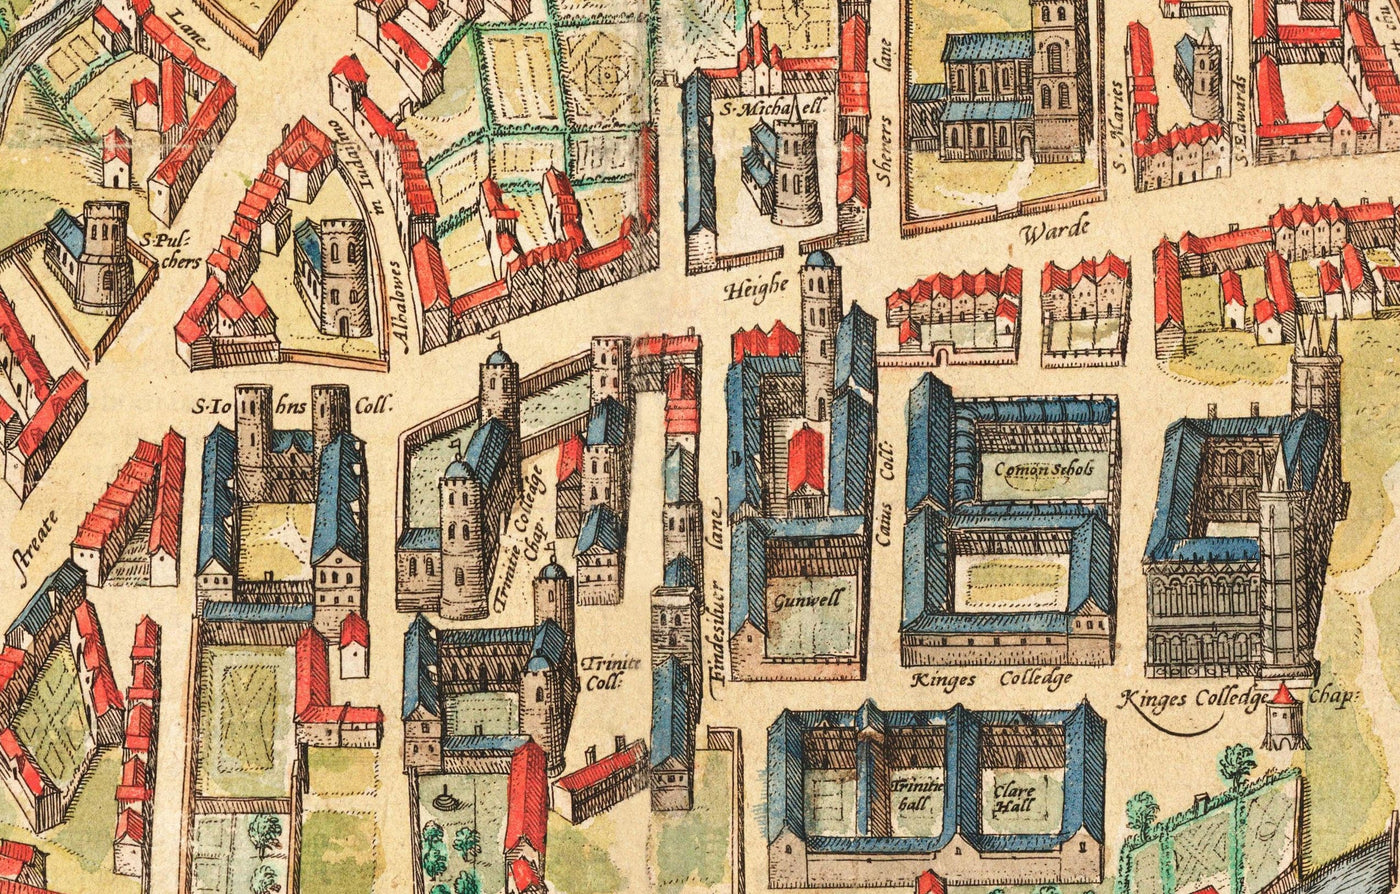 Old Colour Map of Cambridge and University Colleges, 1575 by Georg Braun - Trinity, Kings, Queens, Clare, Peterhouse, Christ's, Caius